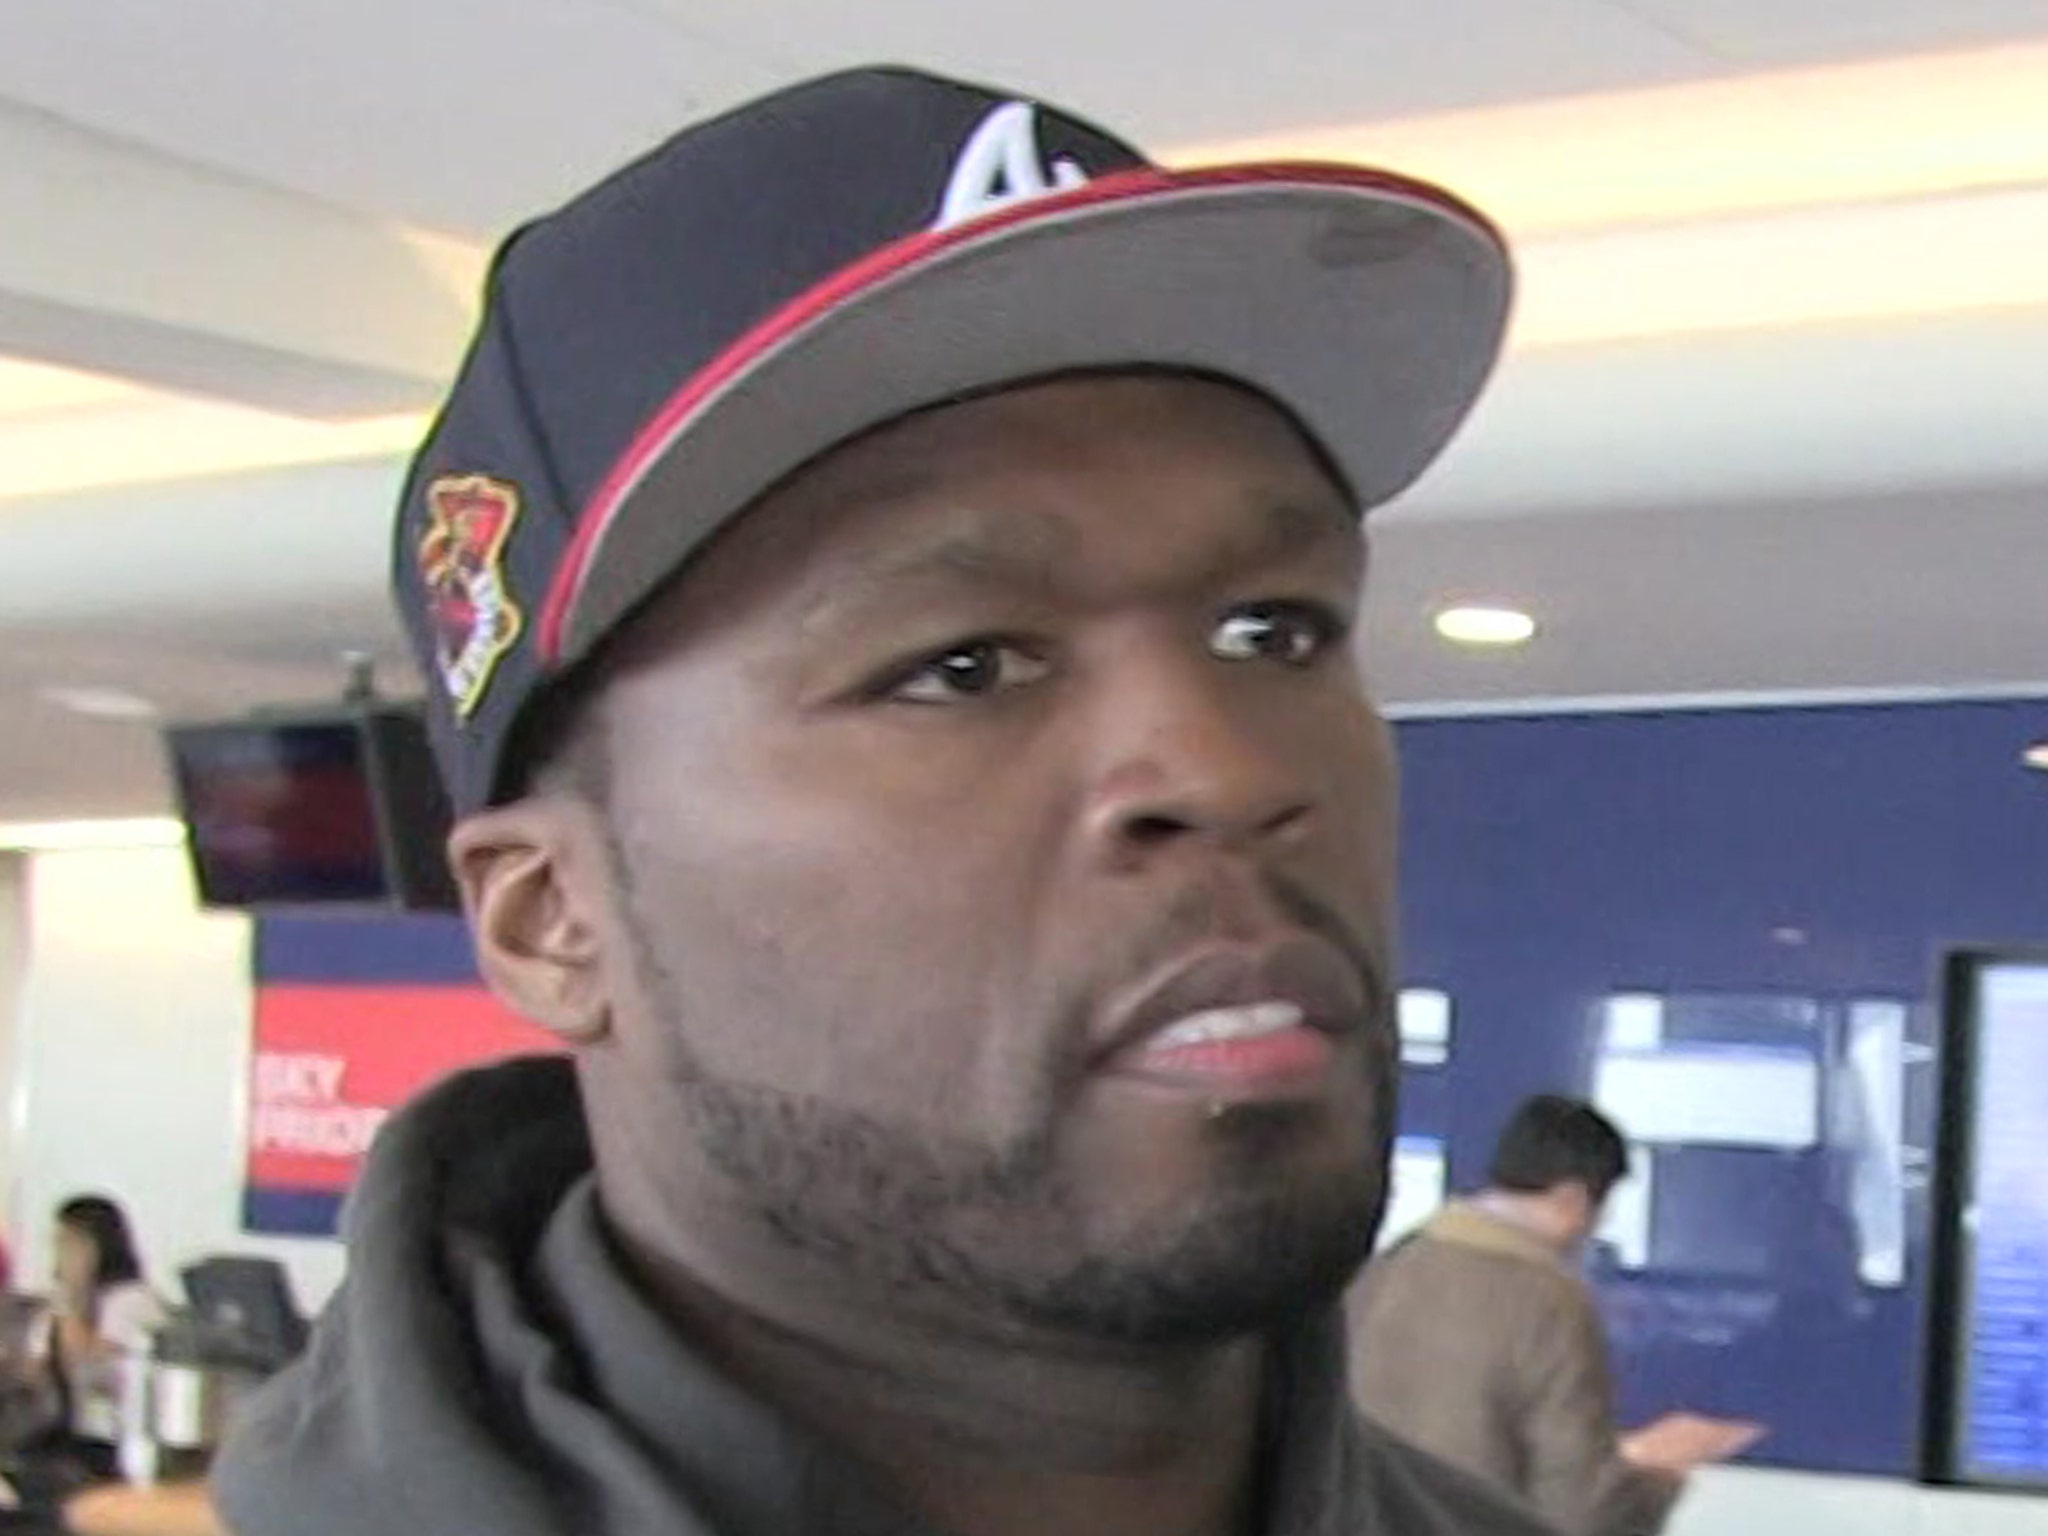 50 Cent Burglary Suspects Arrested Allegedly Stole 3 Million